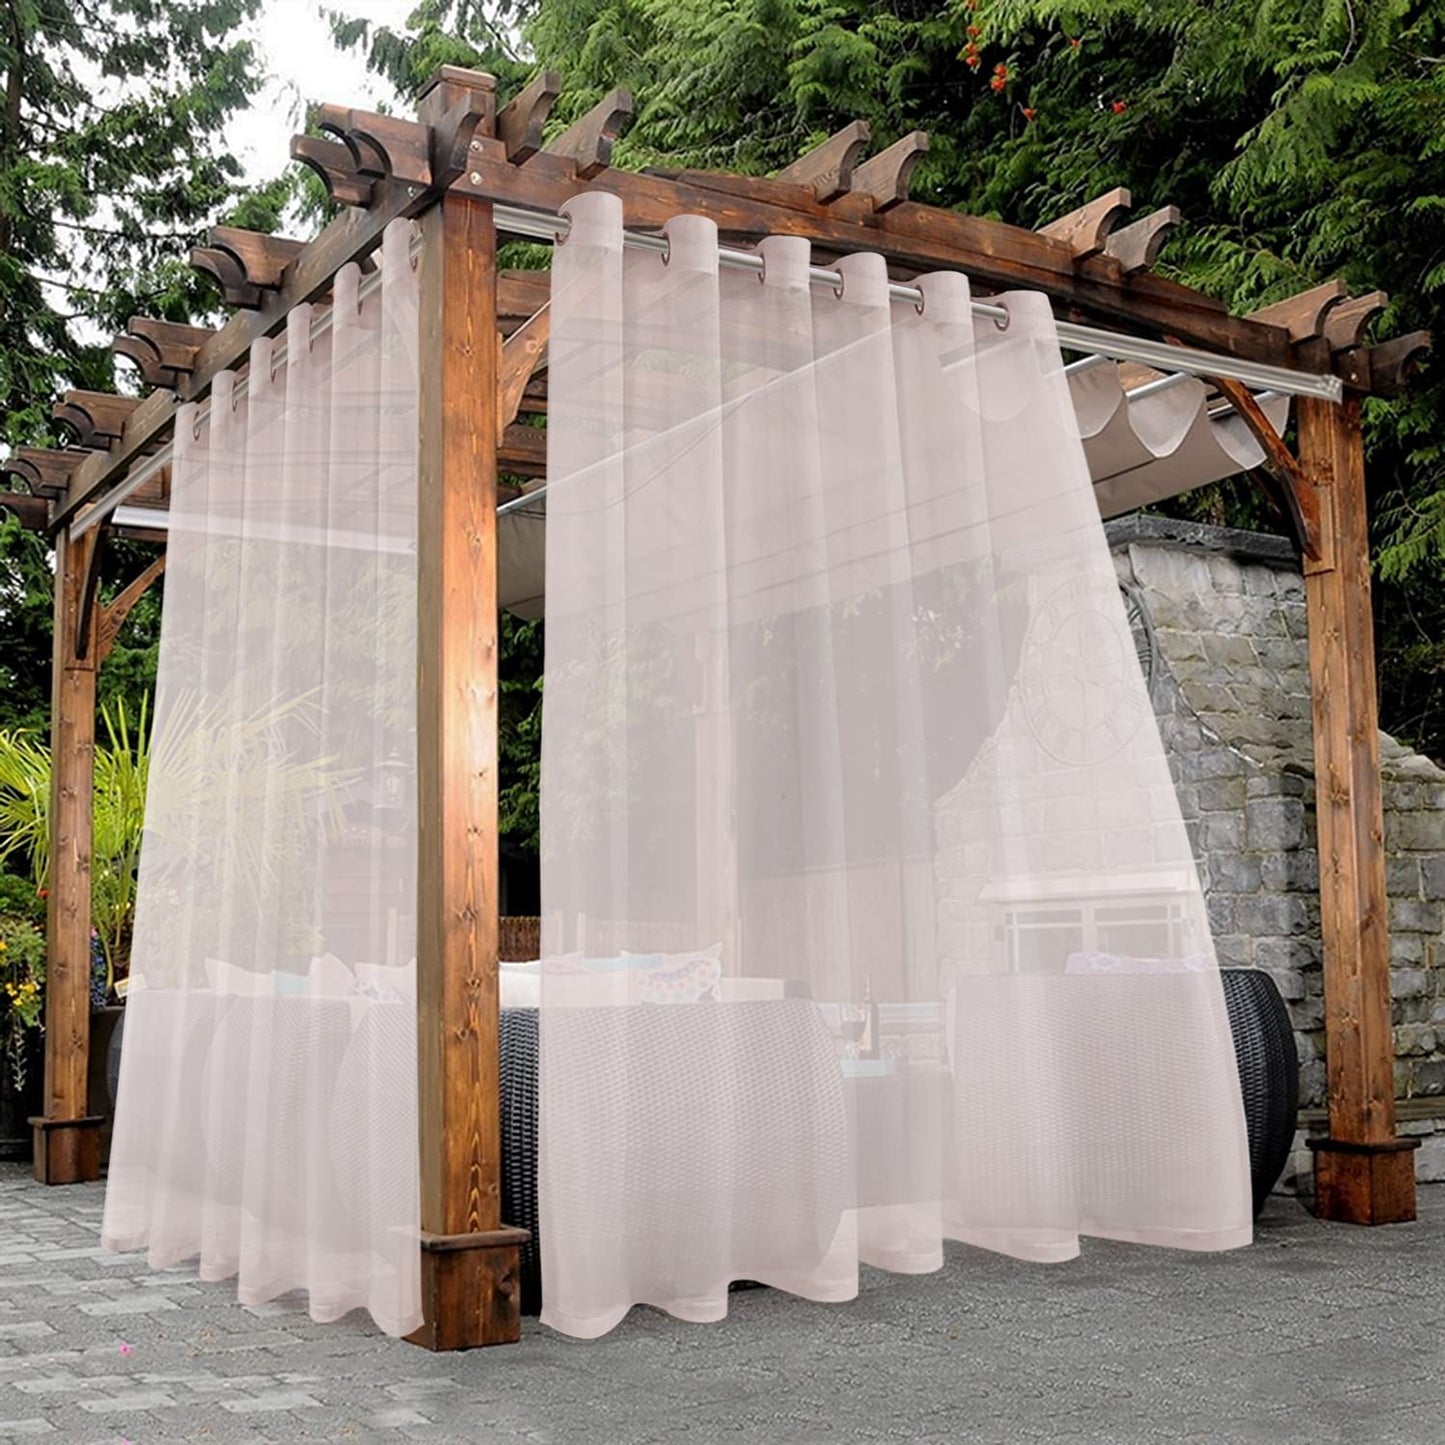 BONZER White Outdoor Sheer Curtains for Patio Waterproof - 2 Panels Grommet Indoor Voile Sheer Curtain for Living Room, Bedroom, Porch, Pergola, Cabana,54 X 84 Inch, White  BONZER Blush 100W X 95L Inch 